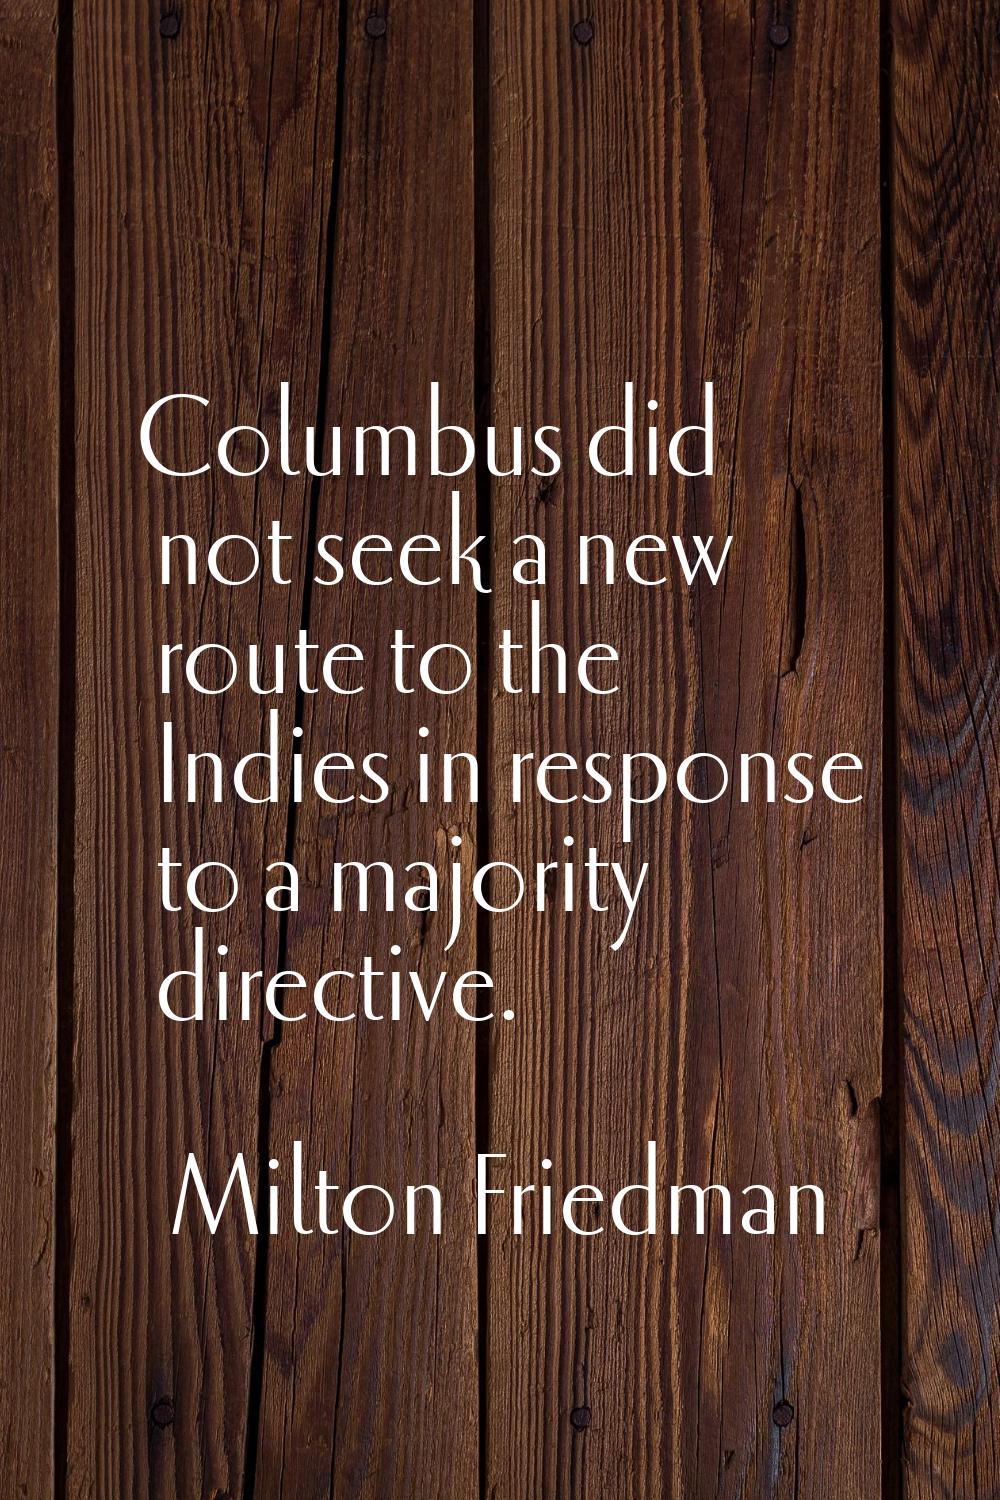 Columbus did not seek a new route to the Indies in response to a majority directive.